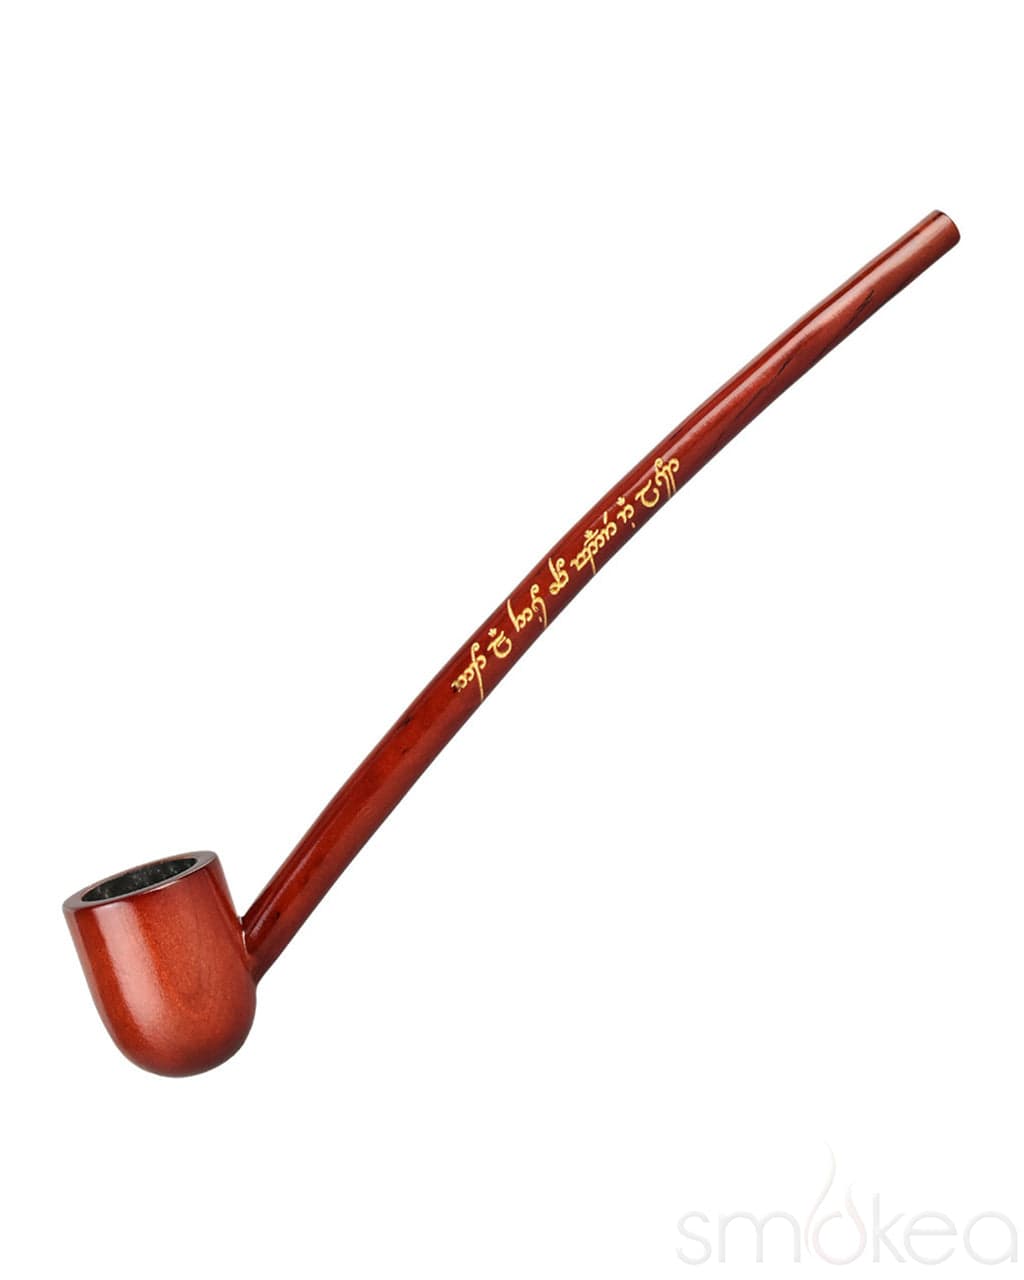 Shire Pipes x The Lord of the Rings Aragorn Pipe